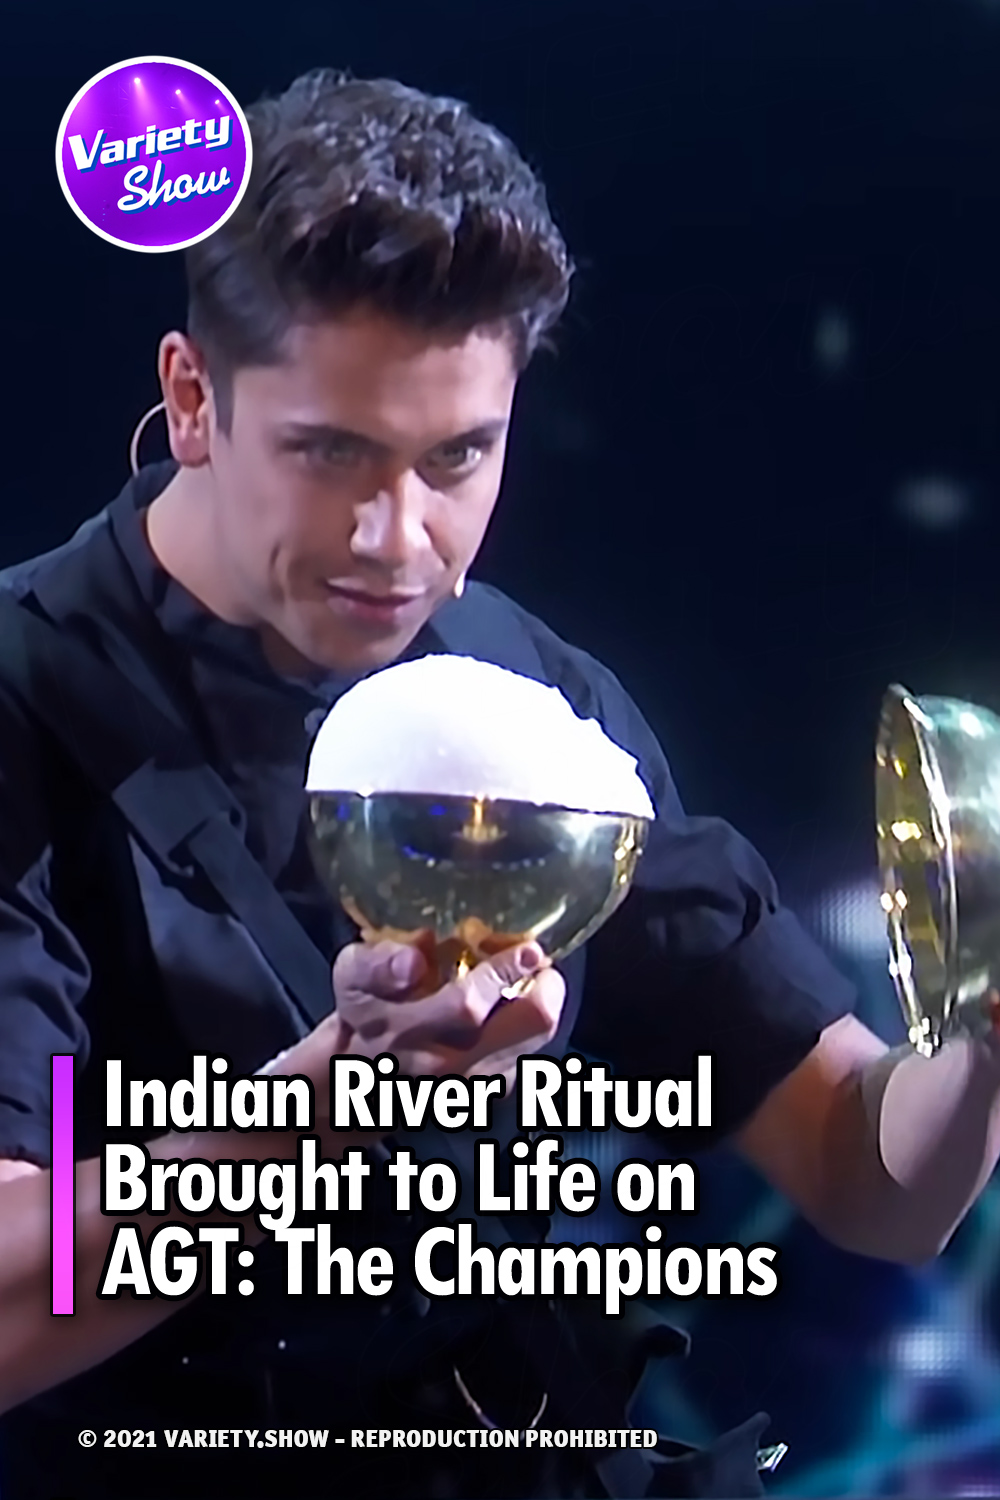 Indian River Ritual Brought to Life on AGT: The Champions